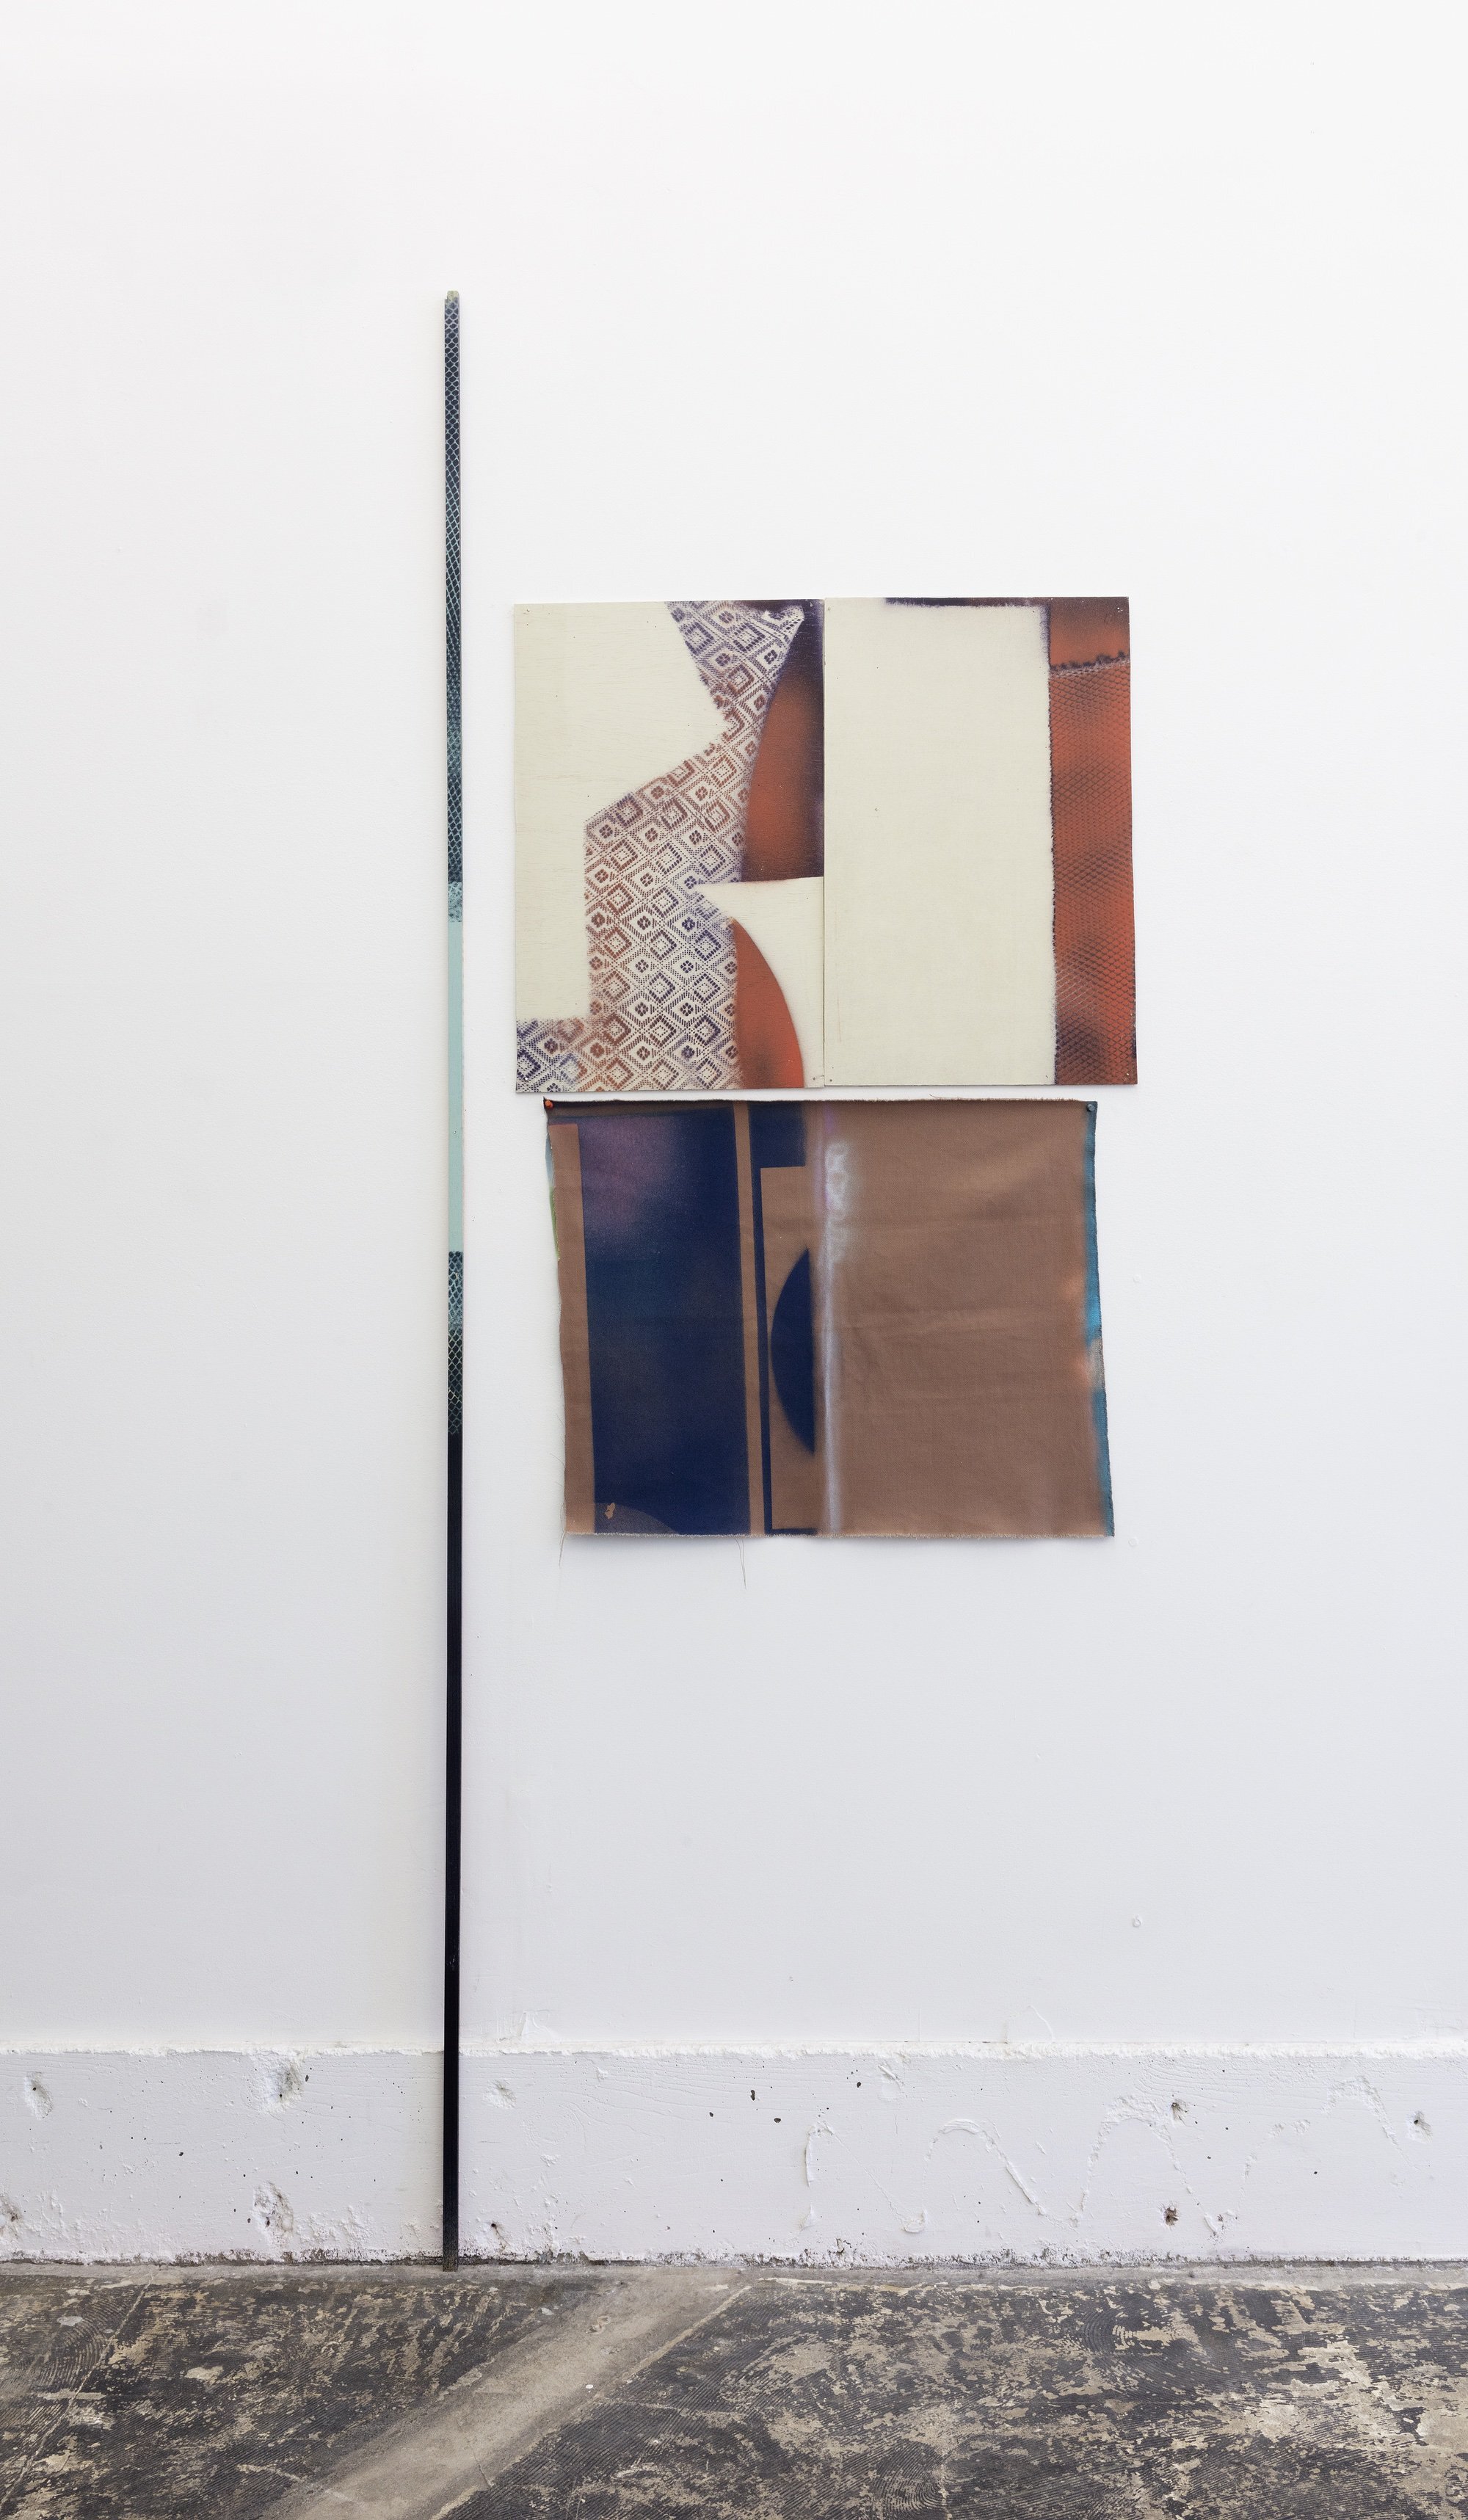  Cybele Lyle  Desert Windows 23 , 2021 Wood panel, acrylic paint, wood, fabric 46 x 32 inches + variable 